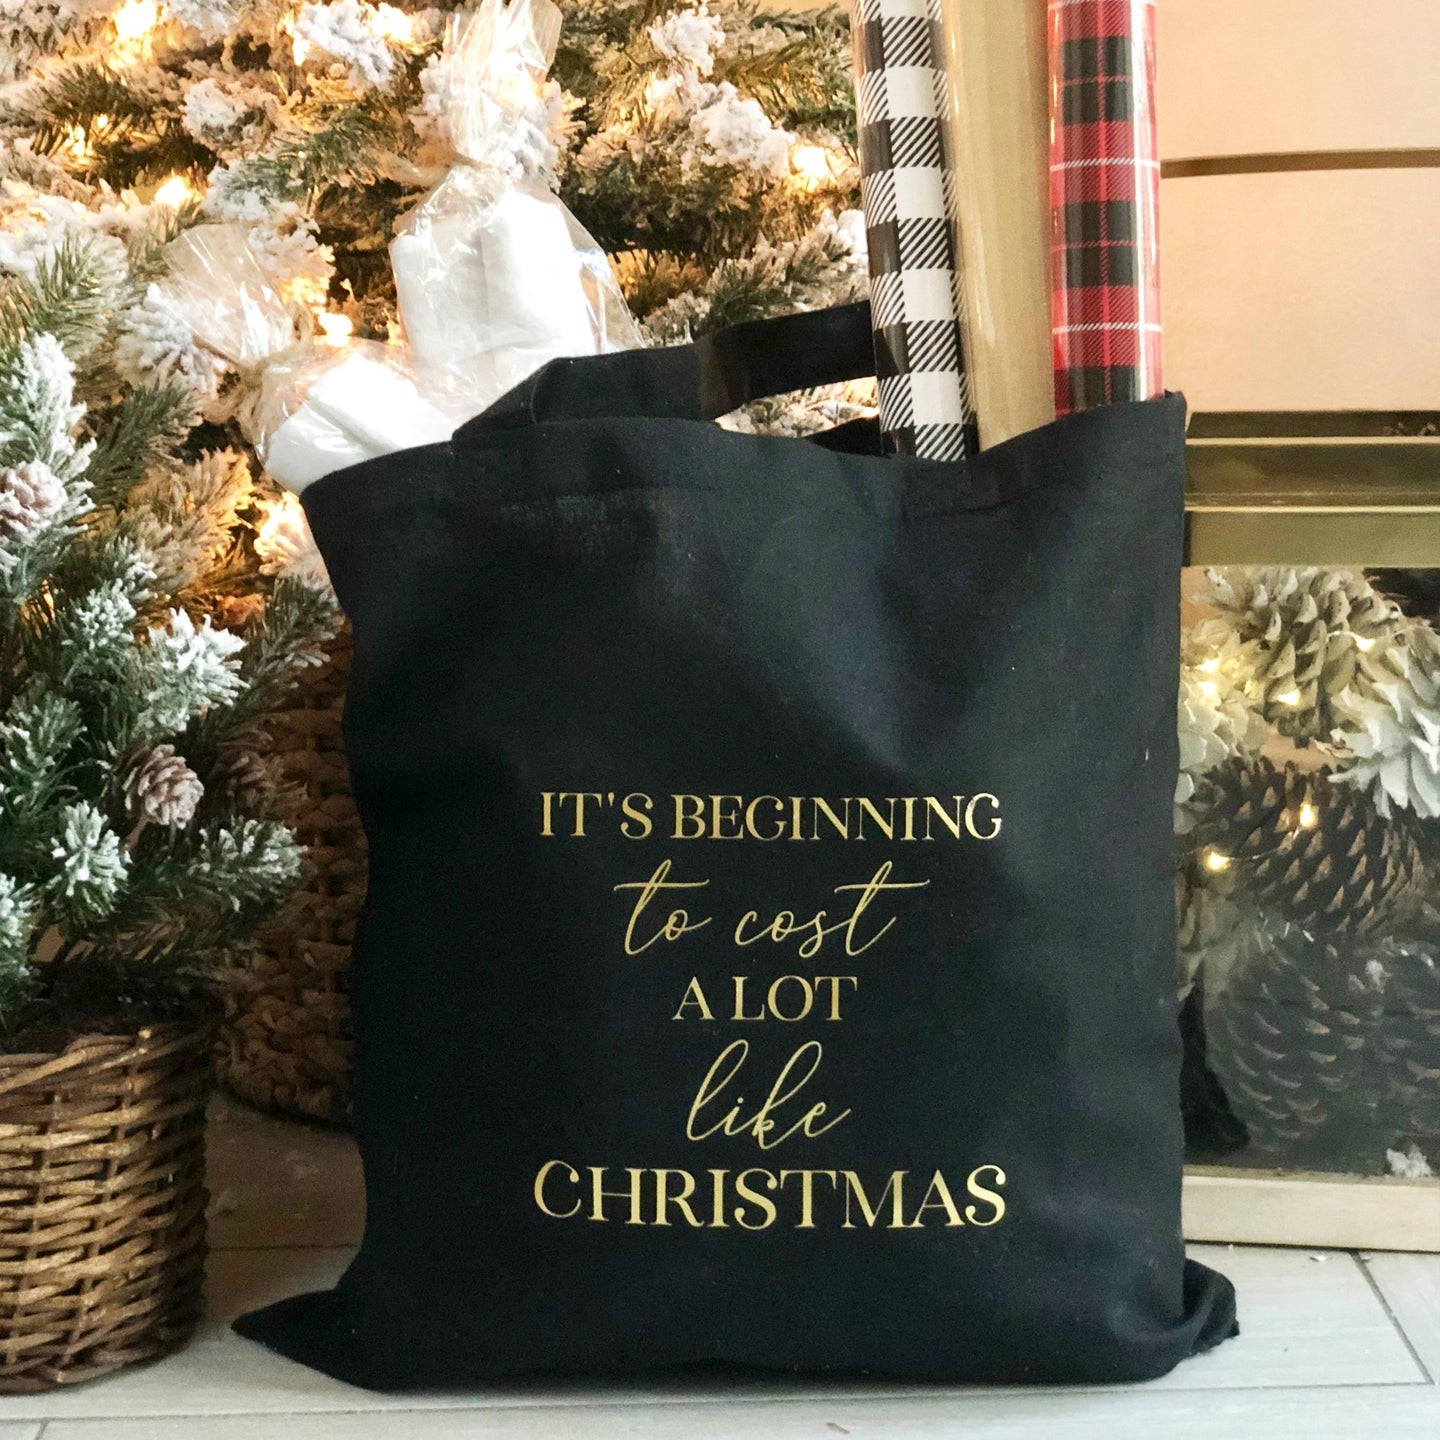 Beginning to Cost a Lot Like Christmas Tote Bag